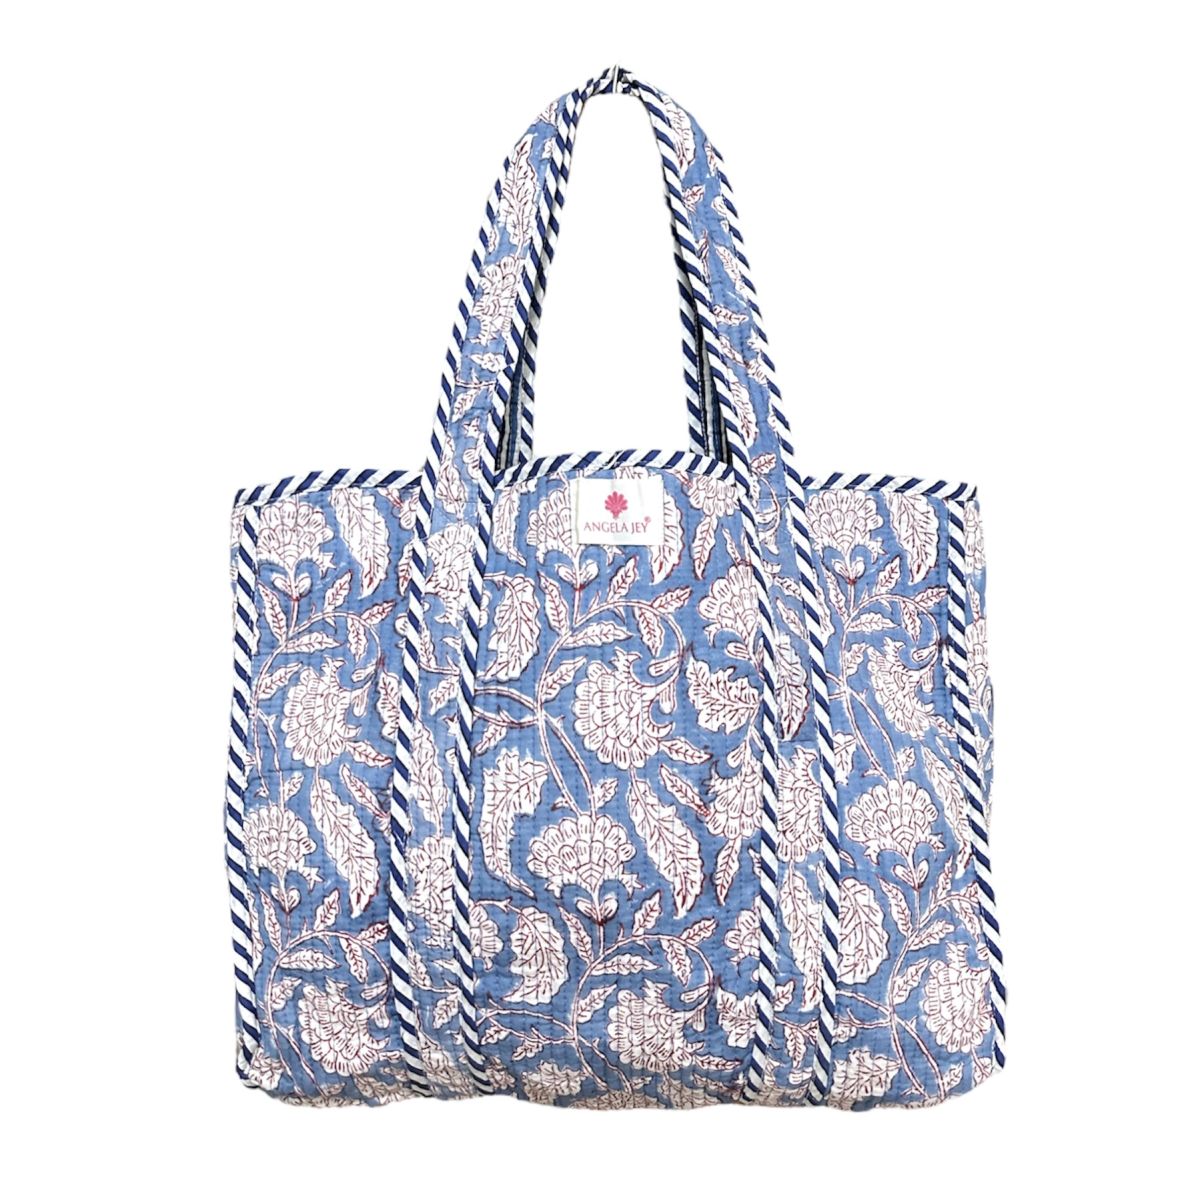 Block Printed Cotton Quilted Bag - Heritage Blue